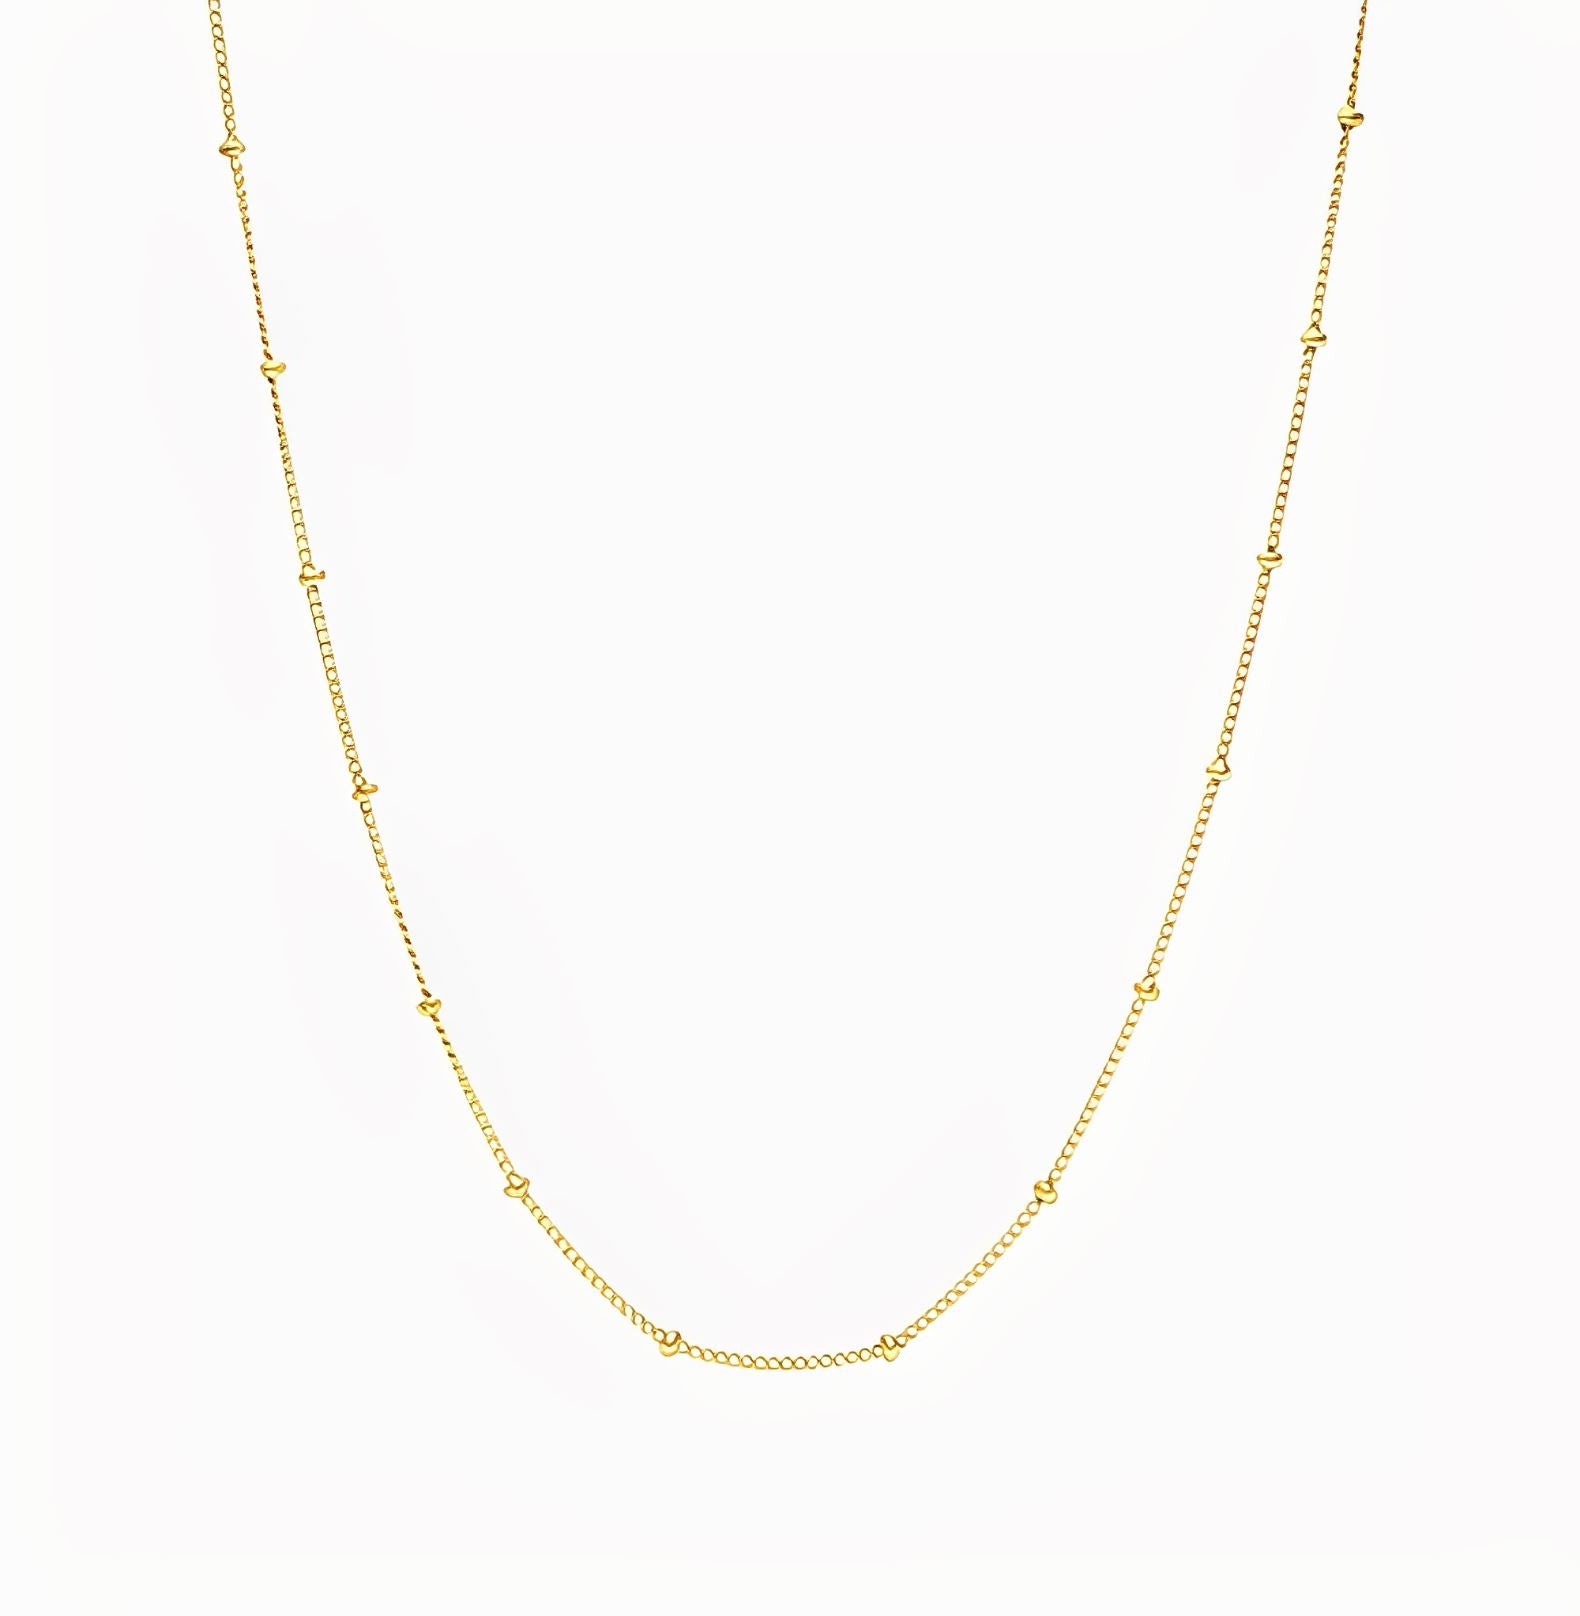 SIMPLE NECKLACE neck Yubama Jewelry Online Store - The Elegant Designs of Gold and Silver ! 